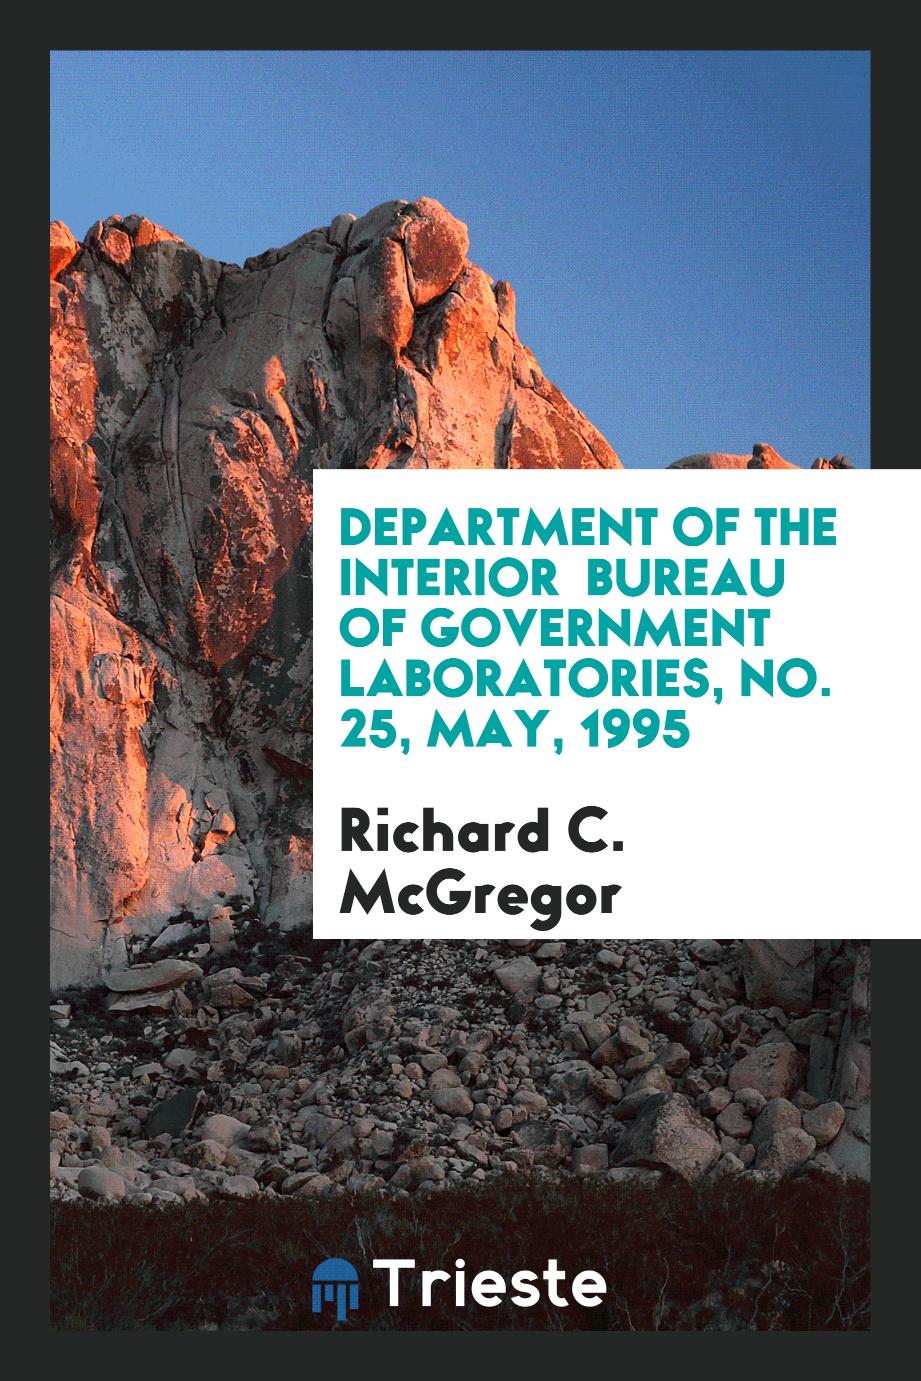 Department of the interior Bureau of Government Laboratories, No. 25, May, 1995